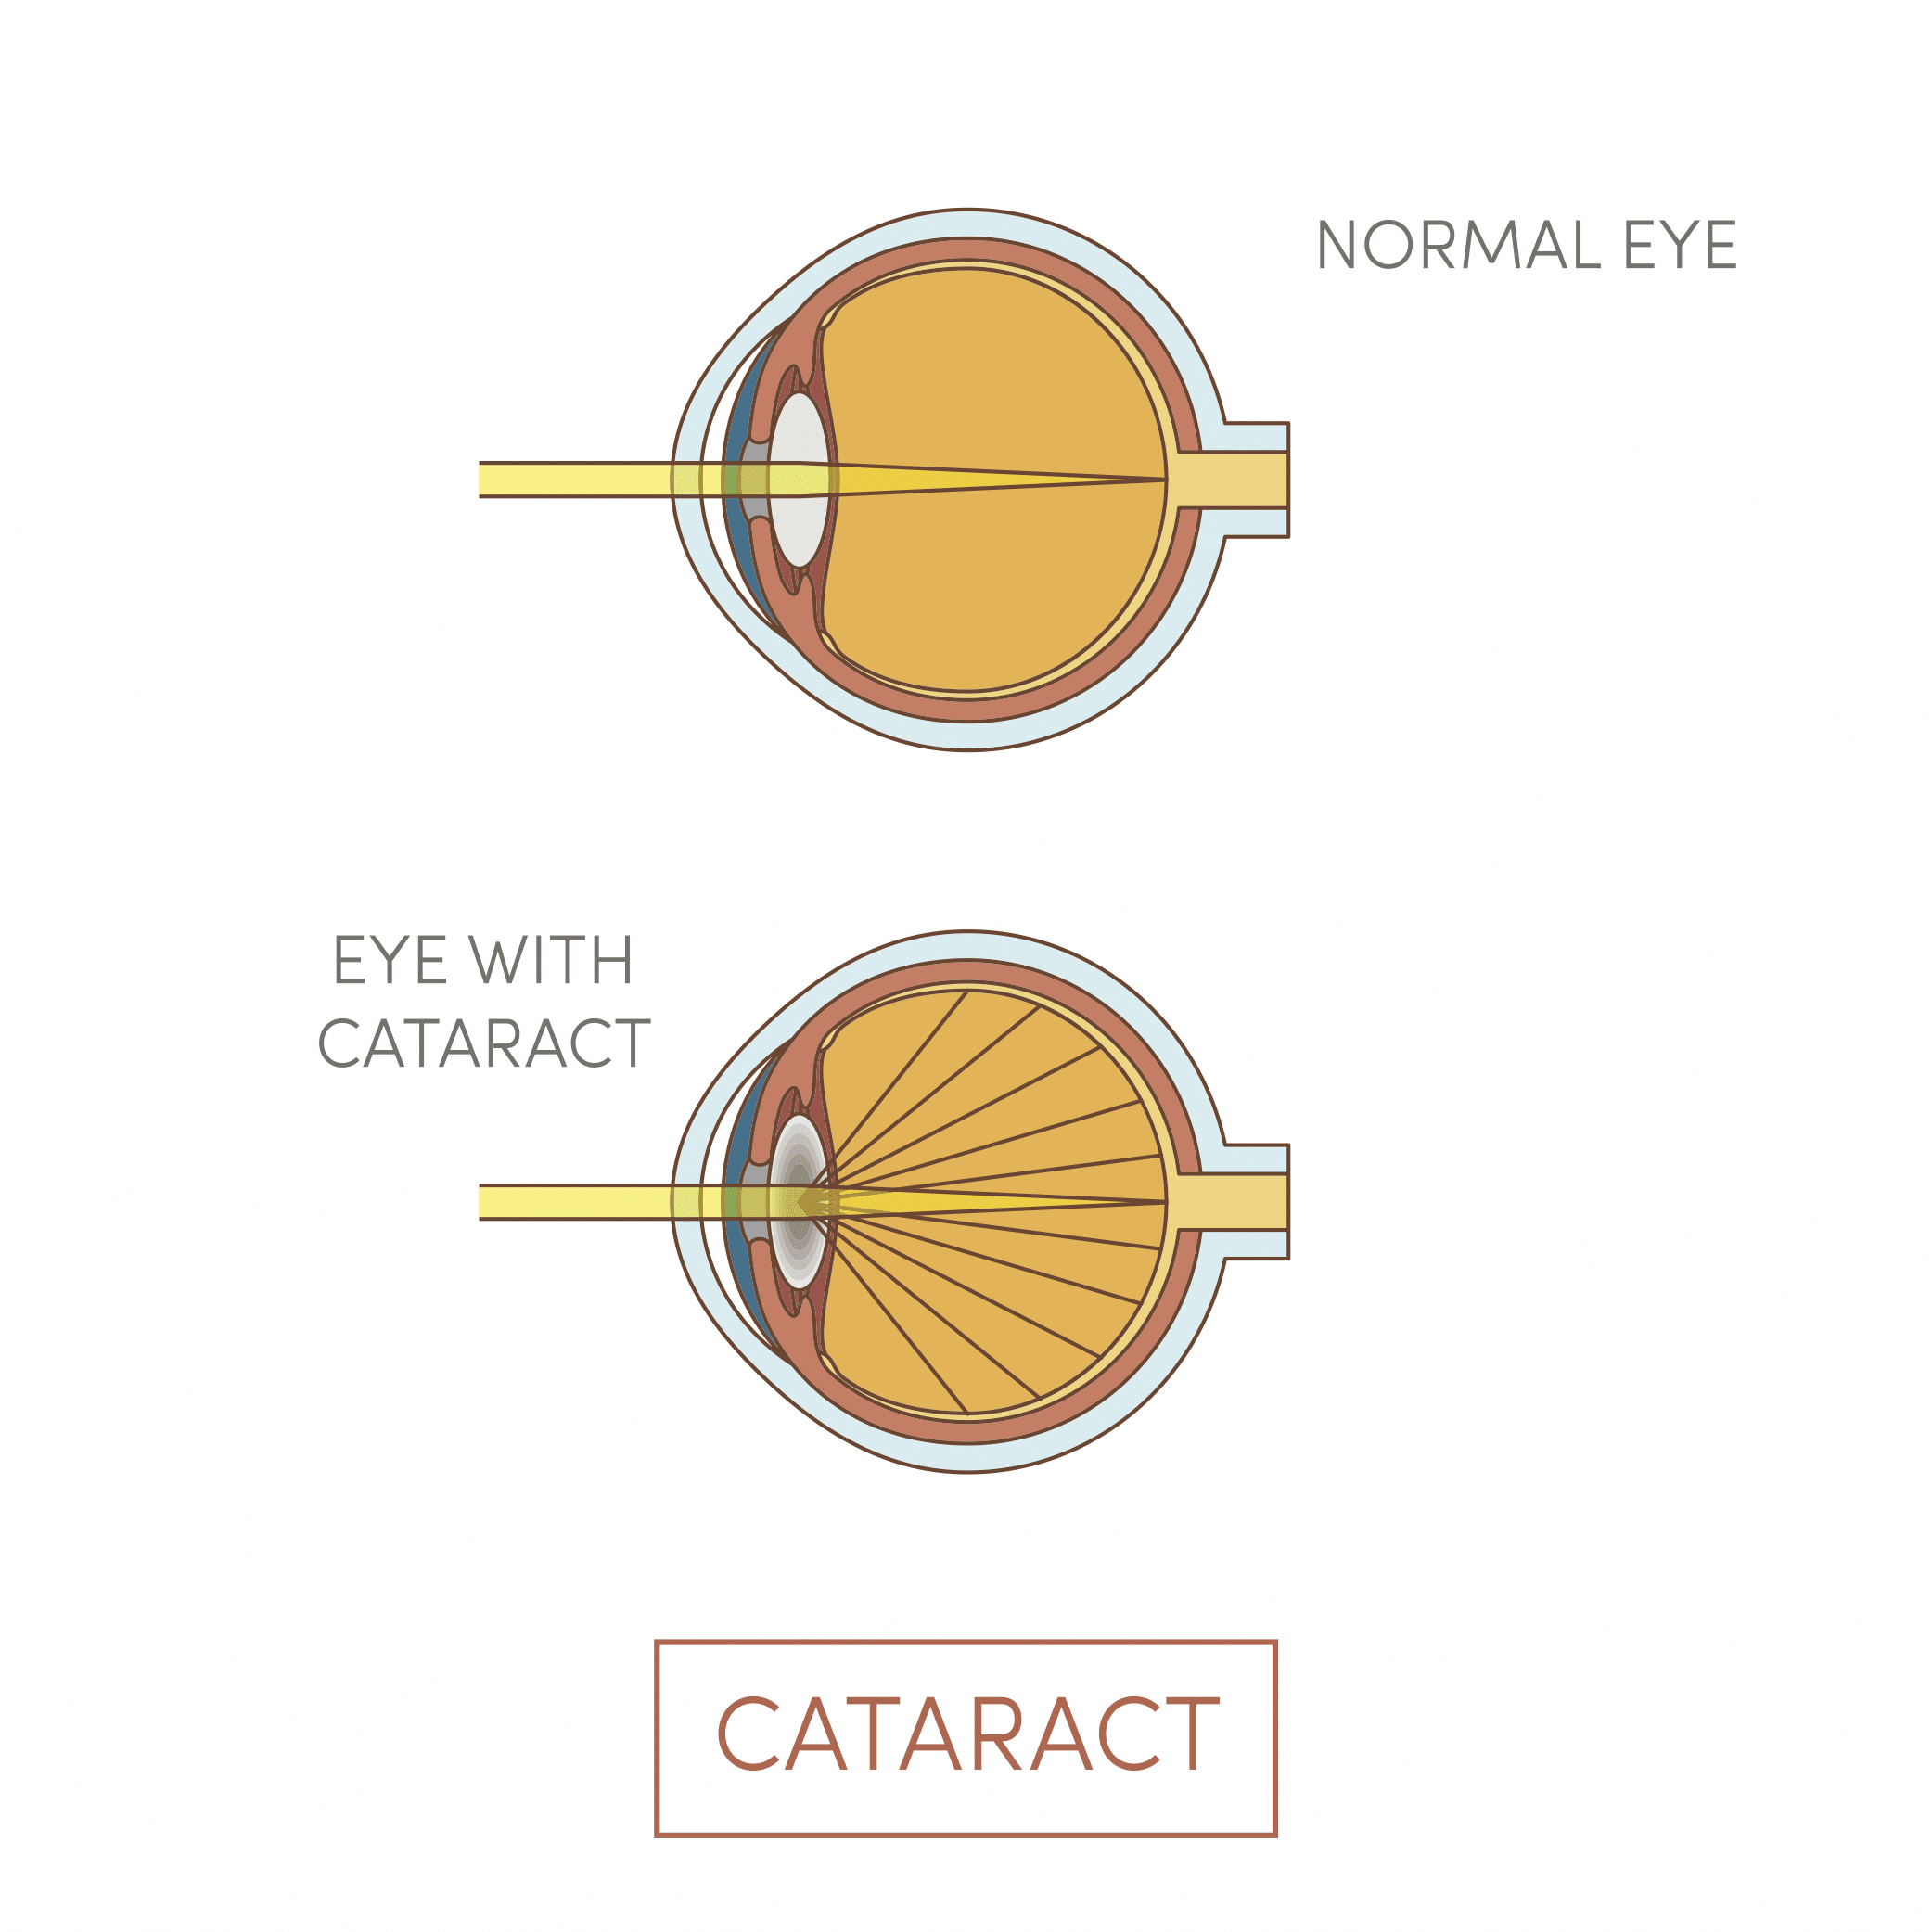 Medical illustration of a normal eye and an eye with cataract